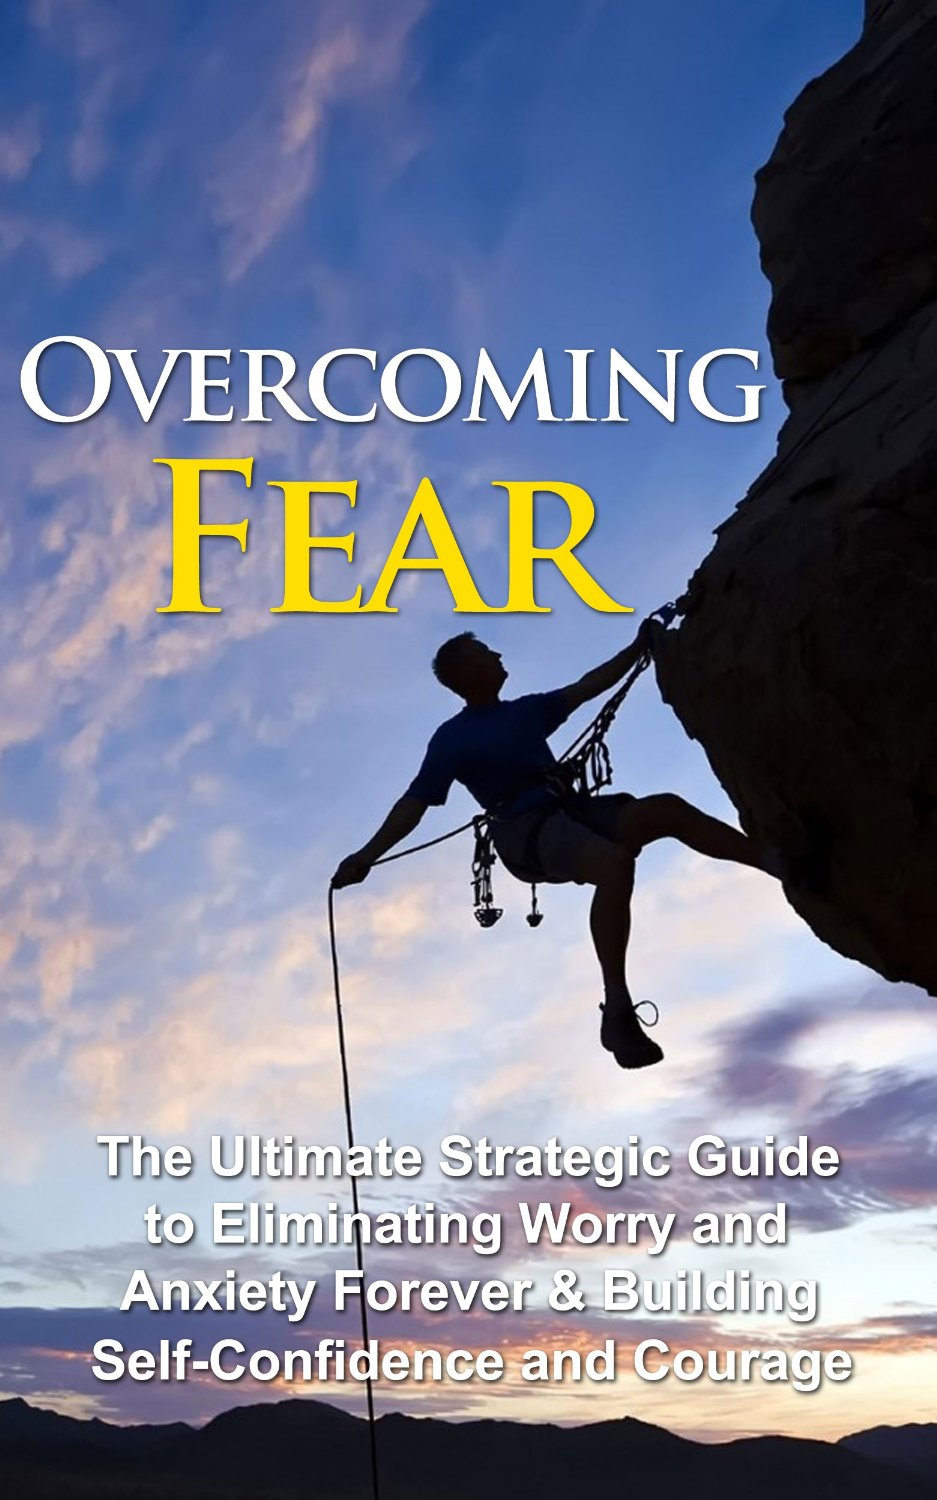 Overcoming Fear: The Ultimate Strategic Guide to Eliminating Worry and Anxiety Forever & Building Self-Confidence and Courage by Kevin Leung